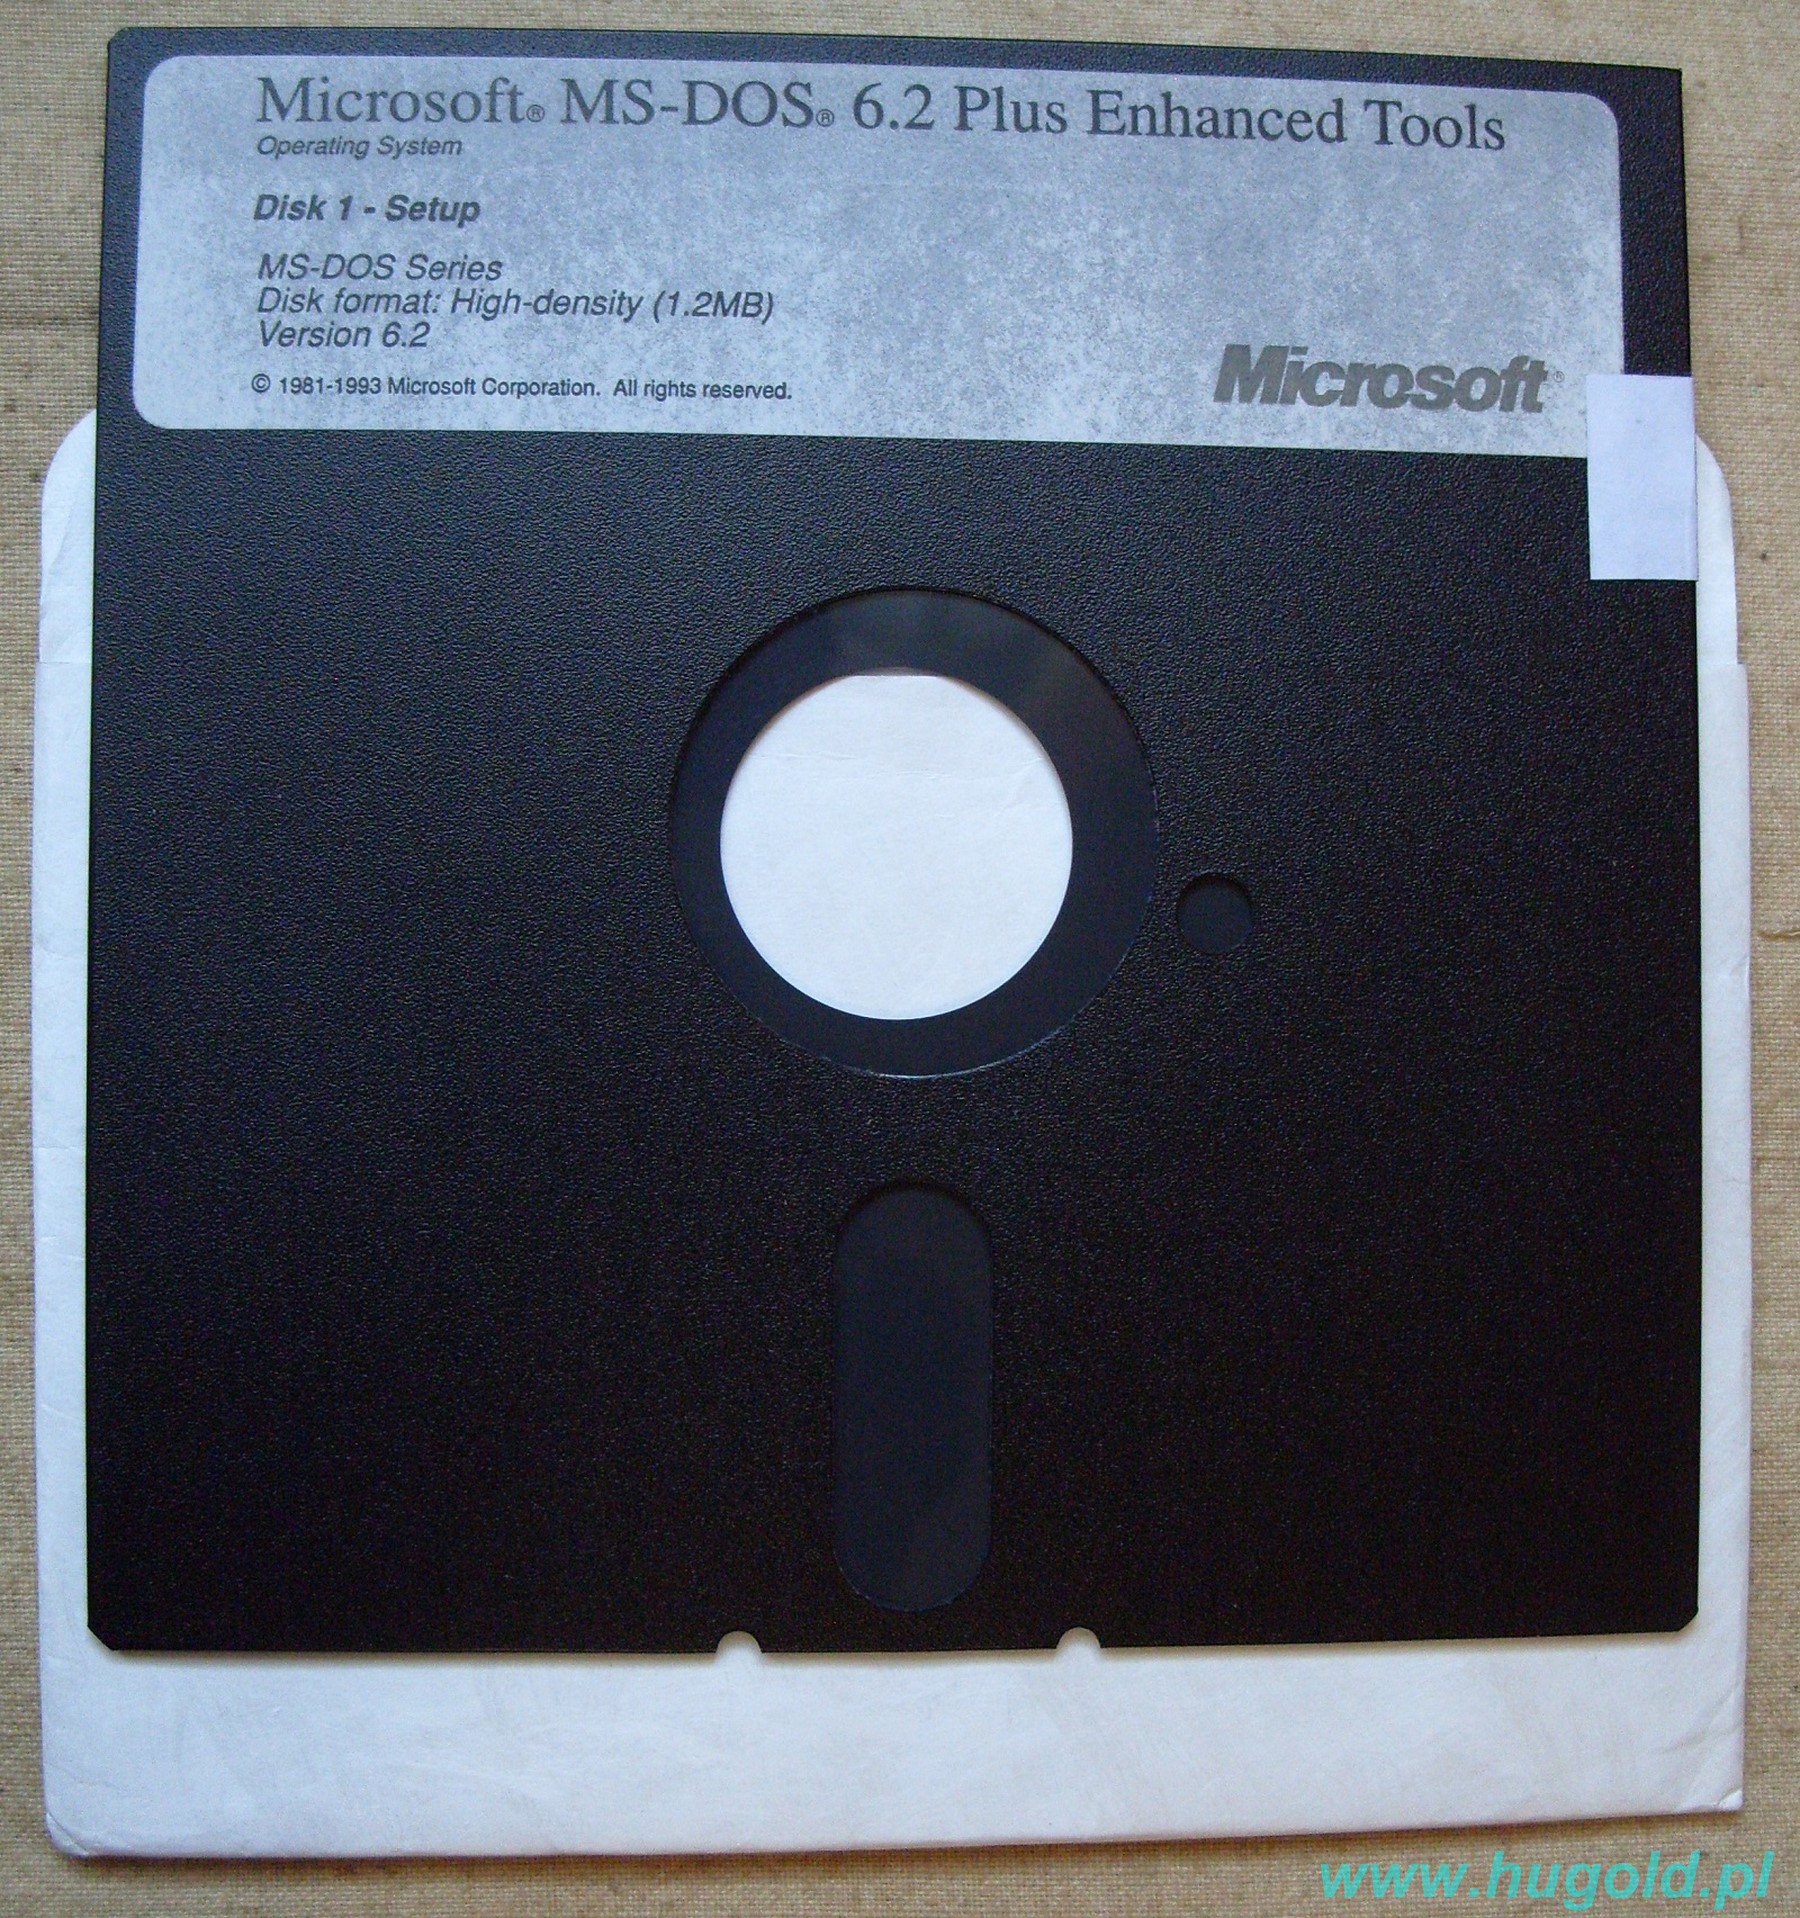 Microsoft MS-DOS 6 Full Version Operating System on 3.5/" Floppy Disks